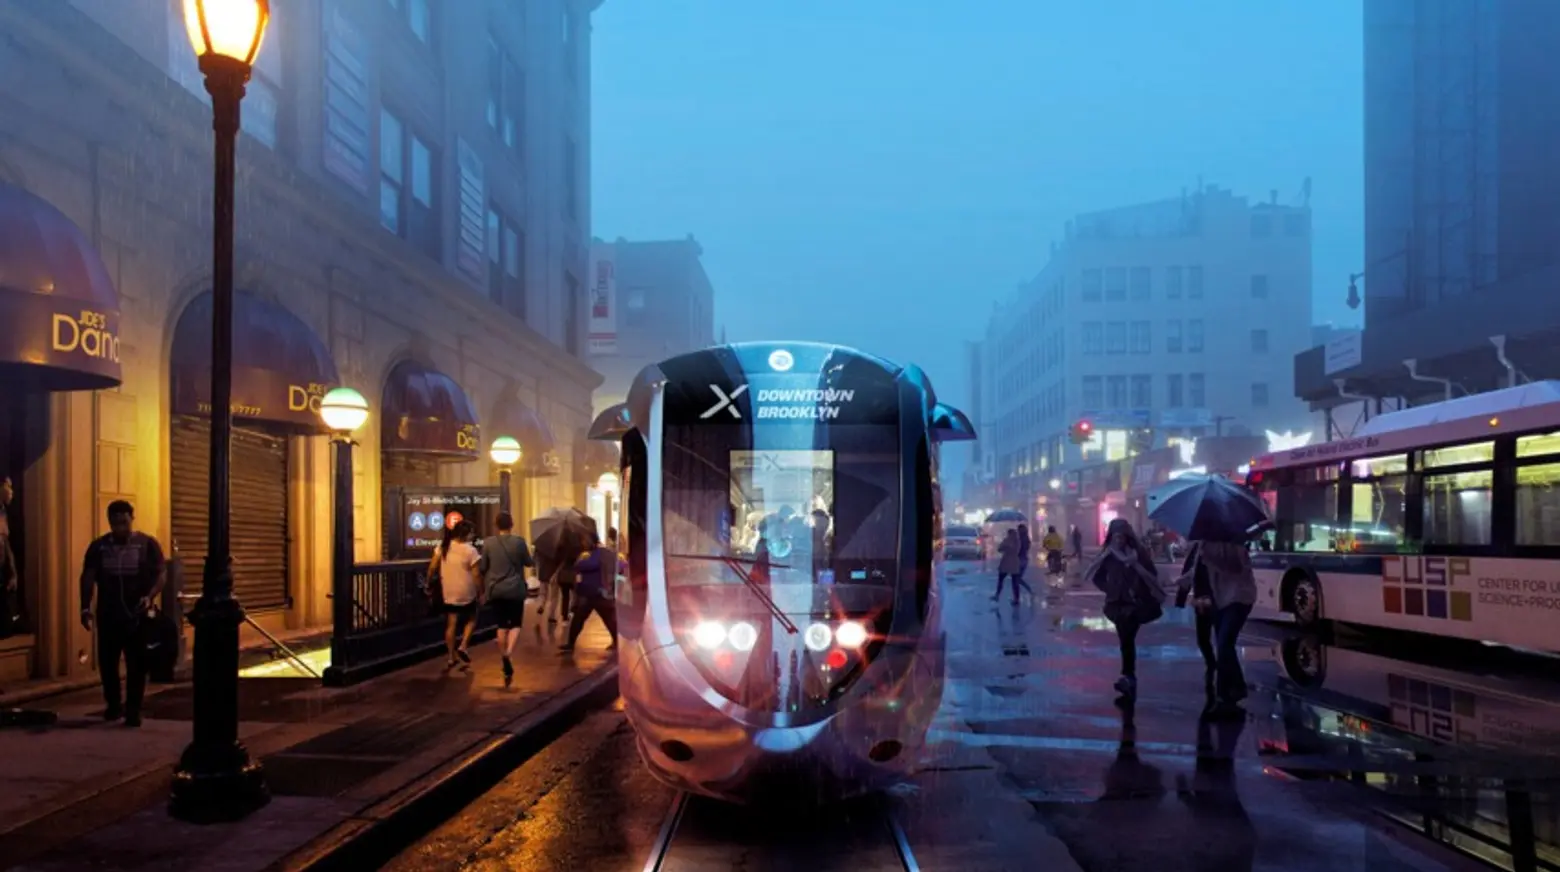 Waterfront Neighborhoods Fear Proposed BQX Streetcar Would Favor ‘Tourists and Yuppies’